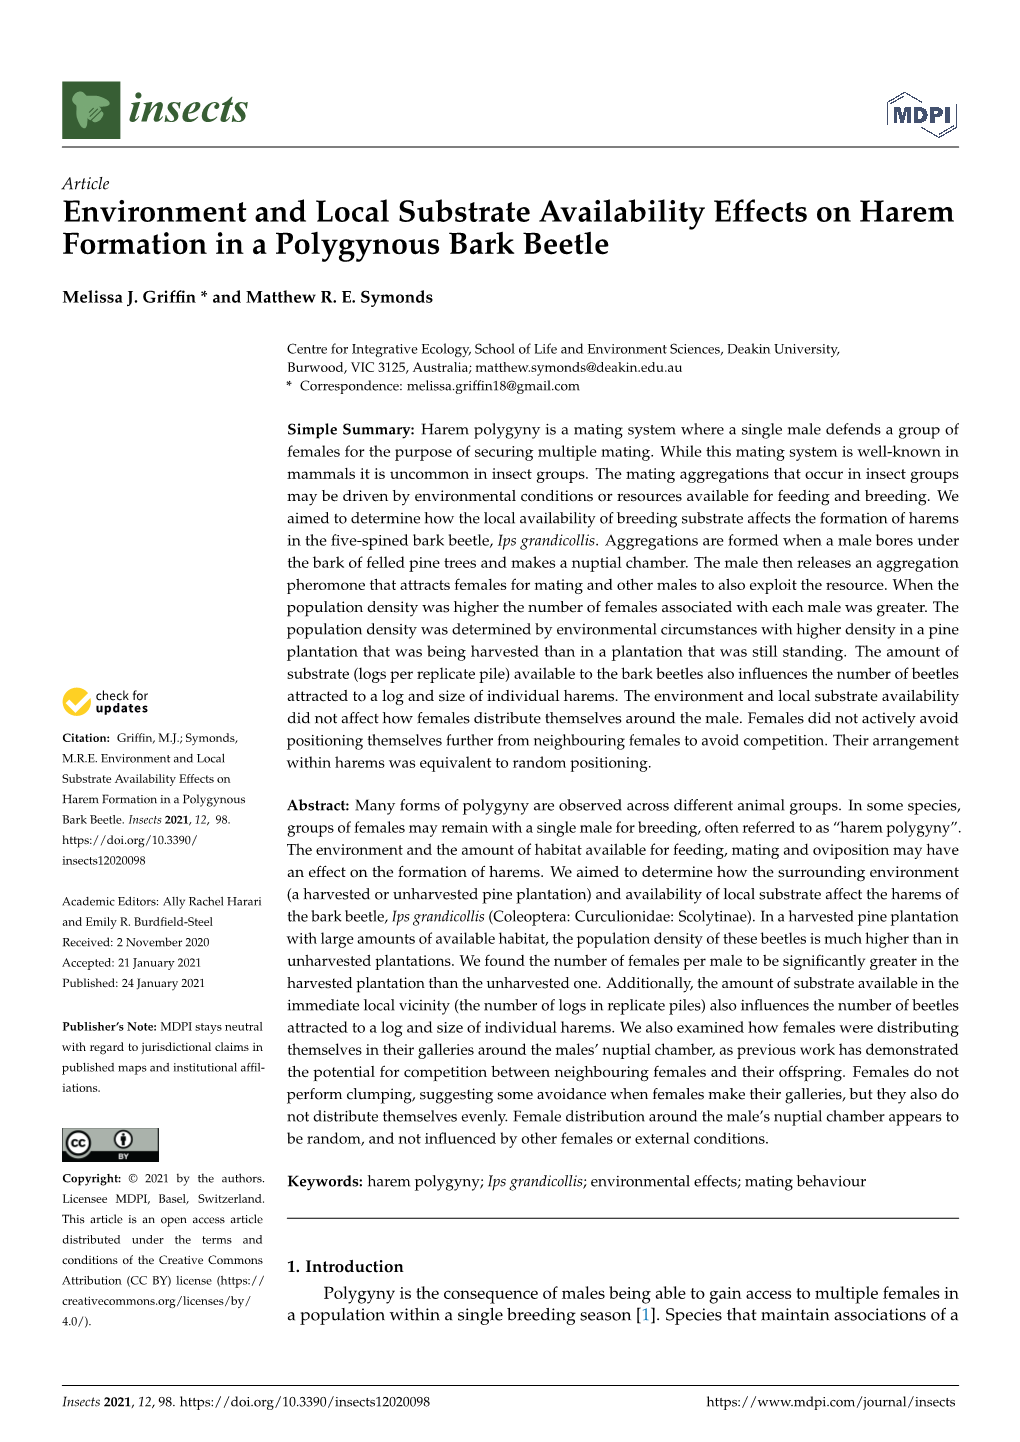 Environment and Local Substrate Availability Effects on Harem Formation in a Polygynous Bark Beetle